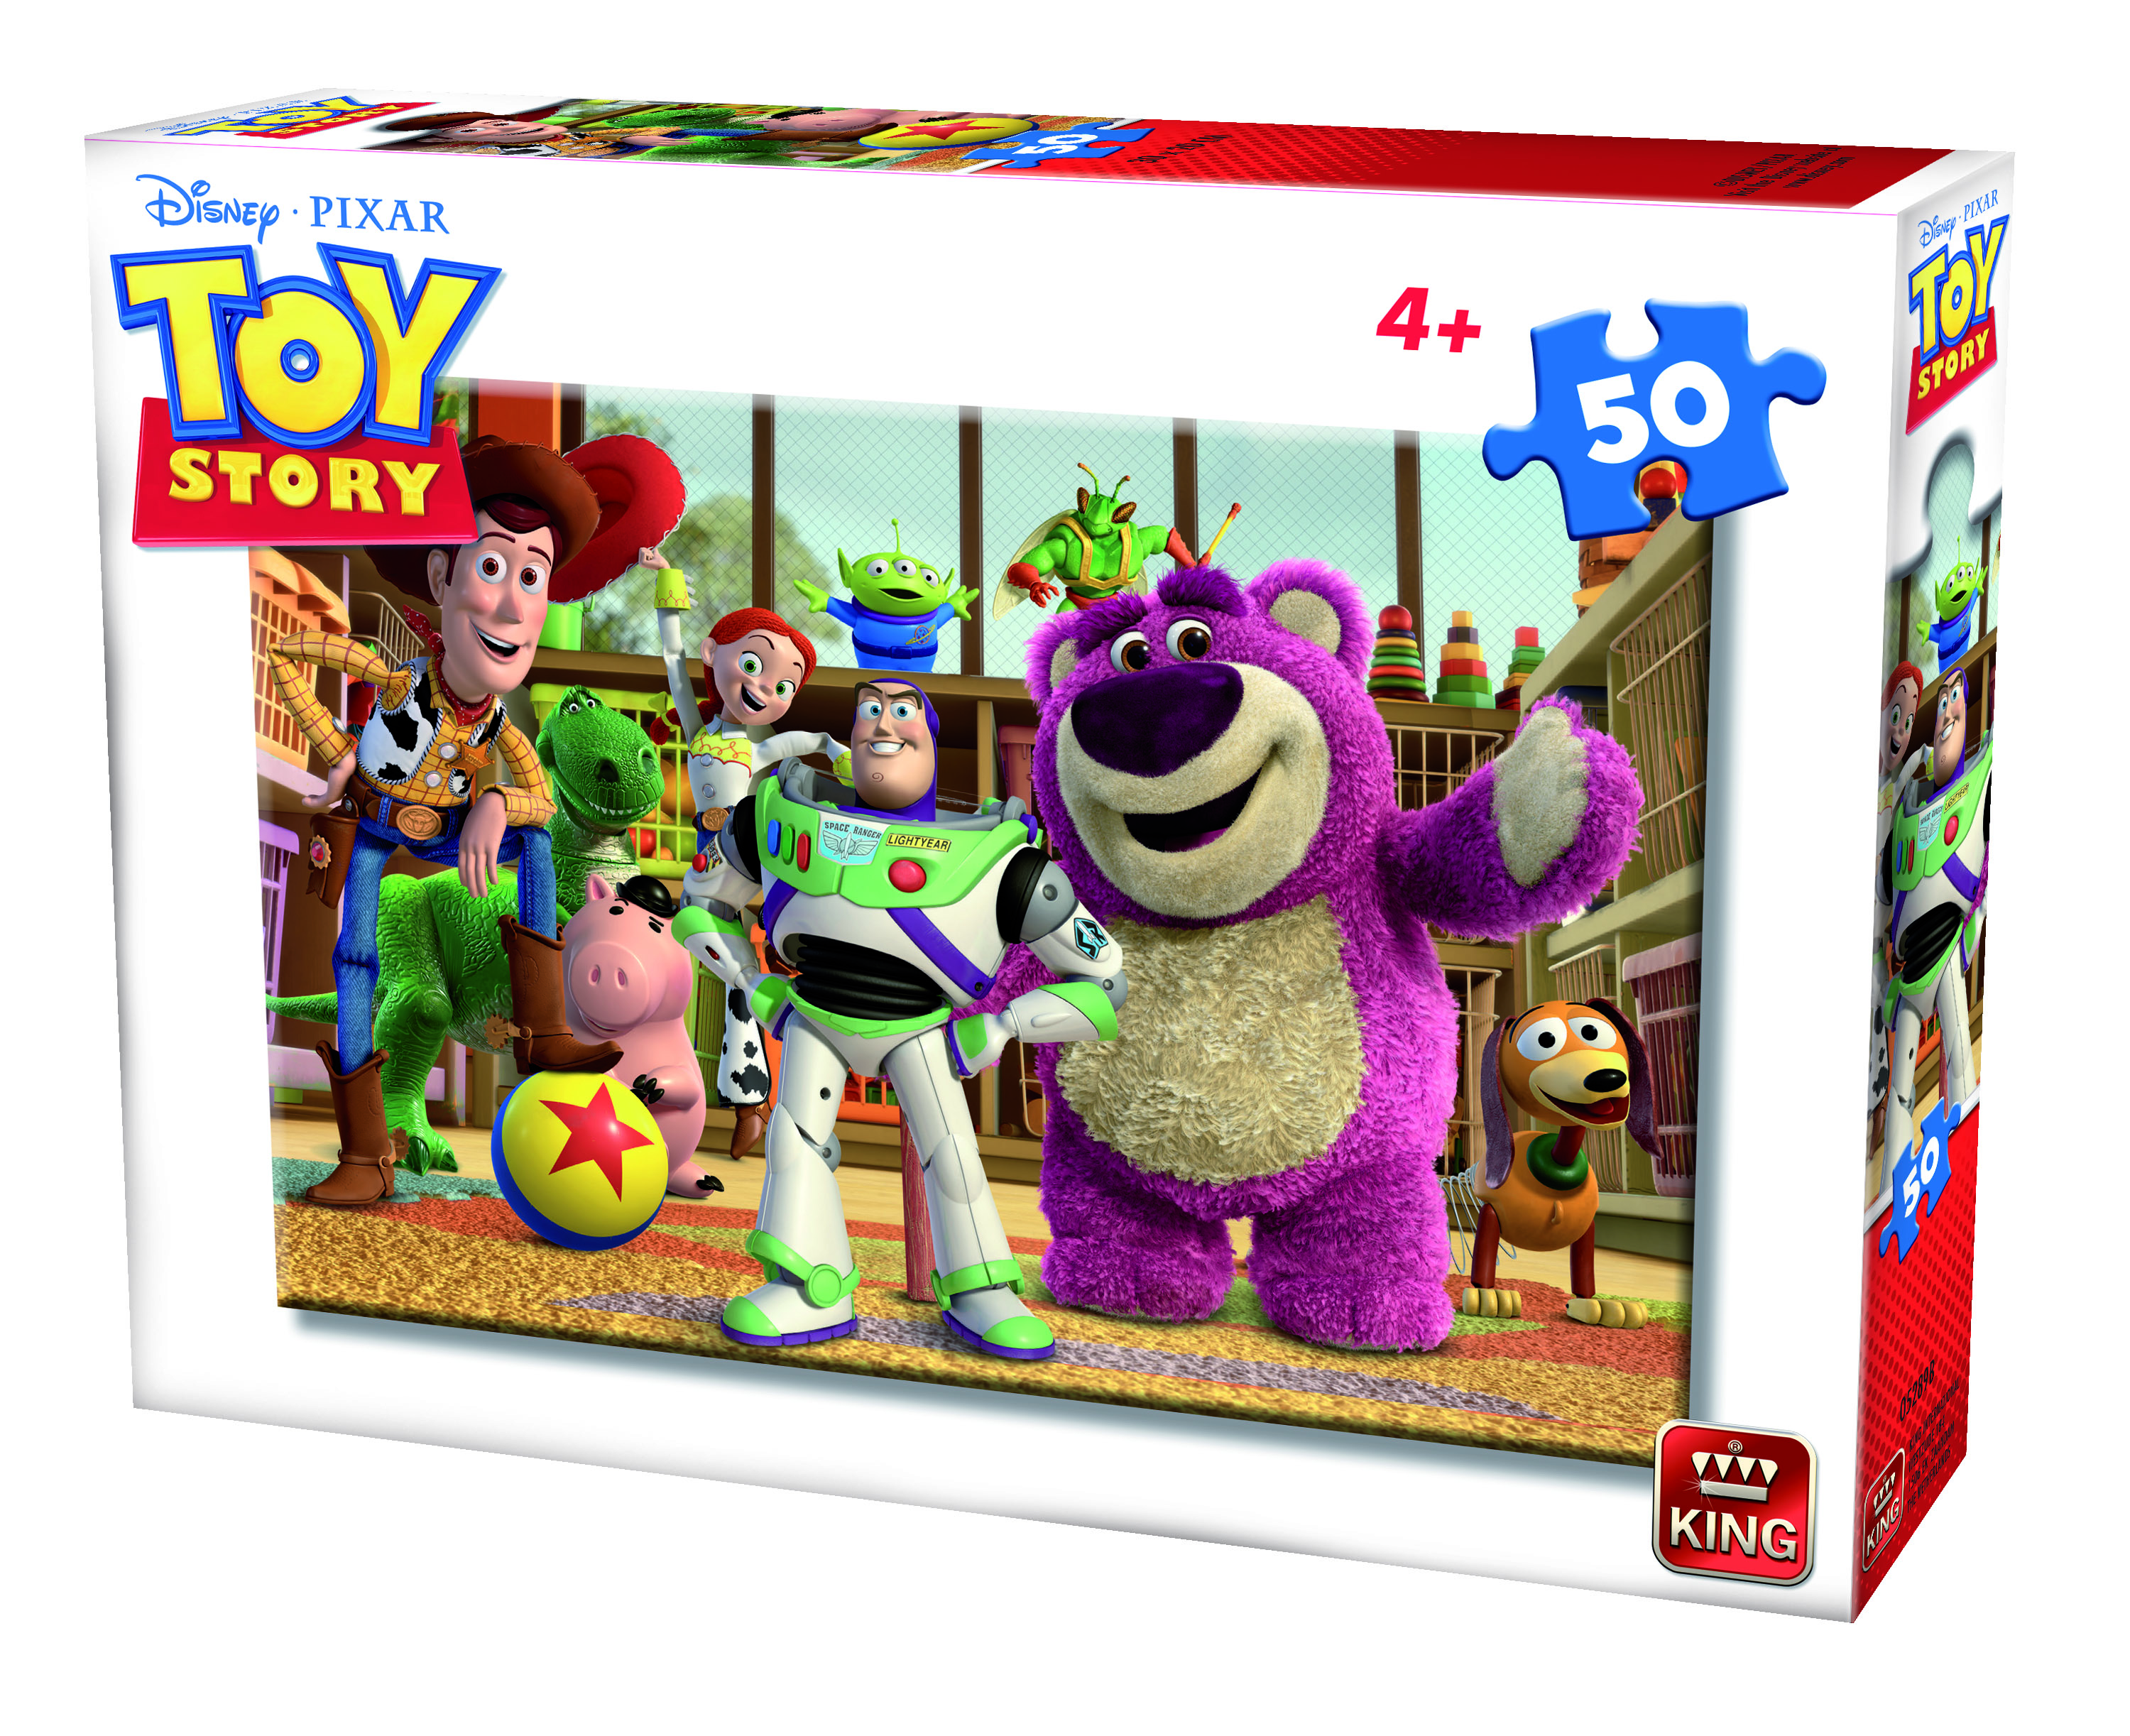 https://data.puzzle.be/king-international-puzzle.134/king-international-toy-story-puzzle-50-pieces.60608-1.fs.jpg